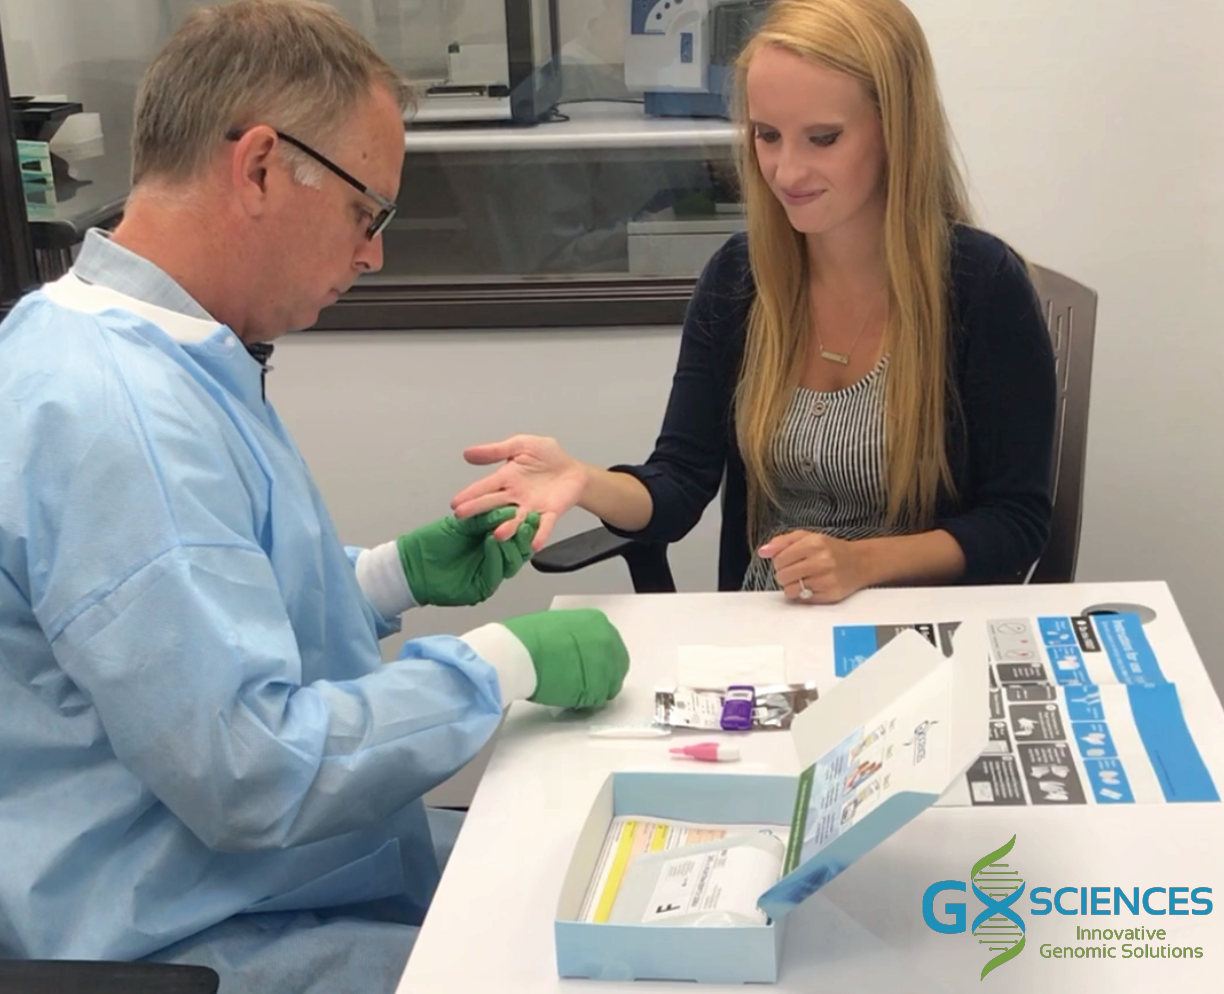 personalized medicine as science and business: GX Sciences™ and remote sampling technology